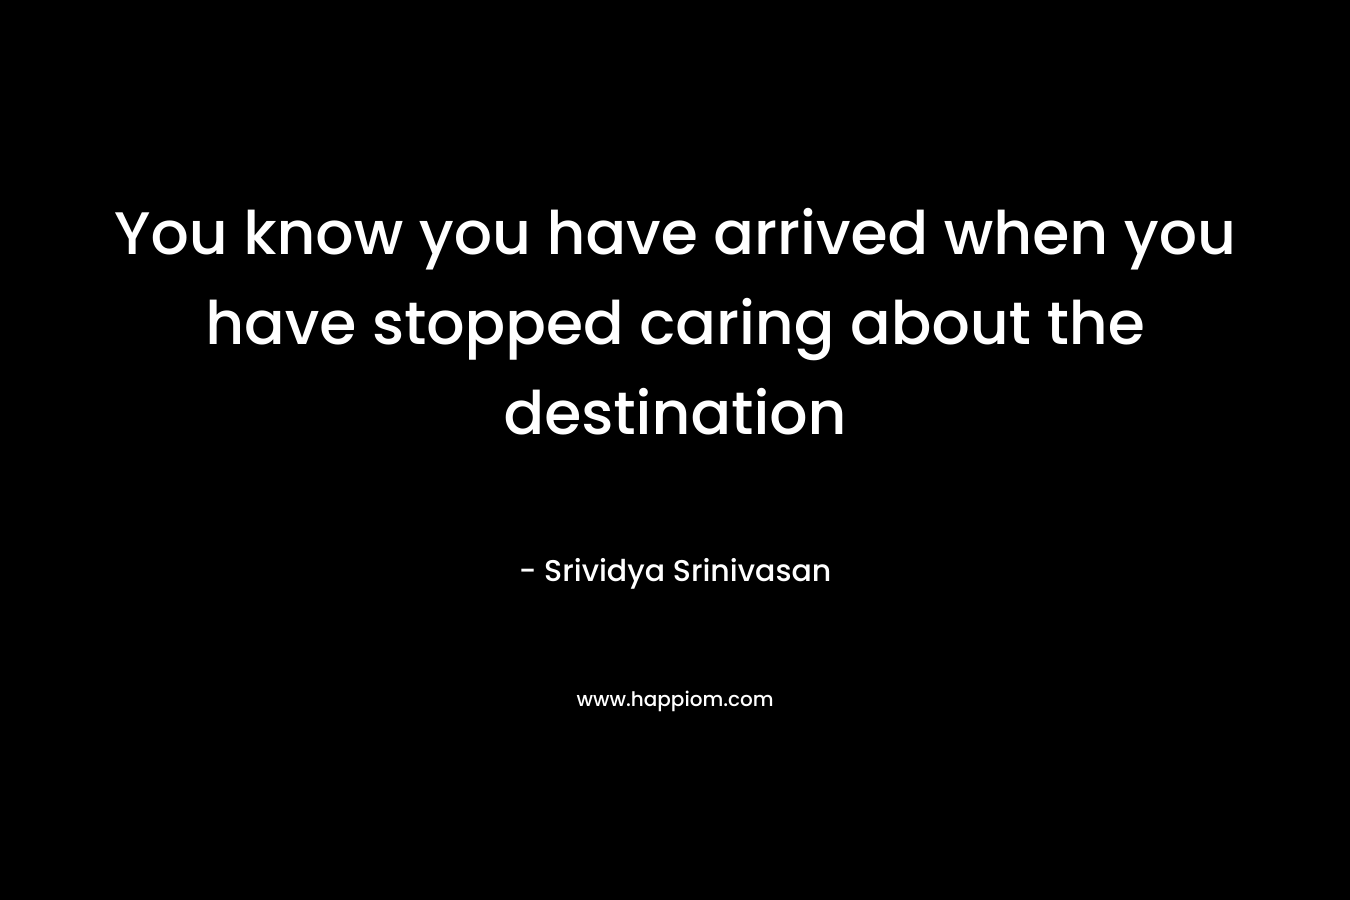 You know you have arrived when you have stopped caring about the destination